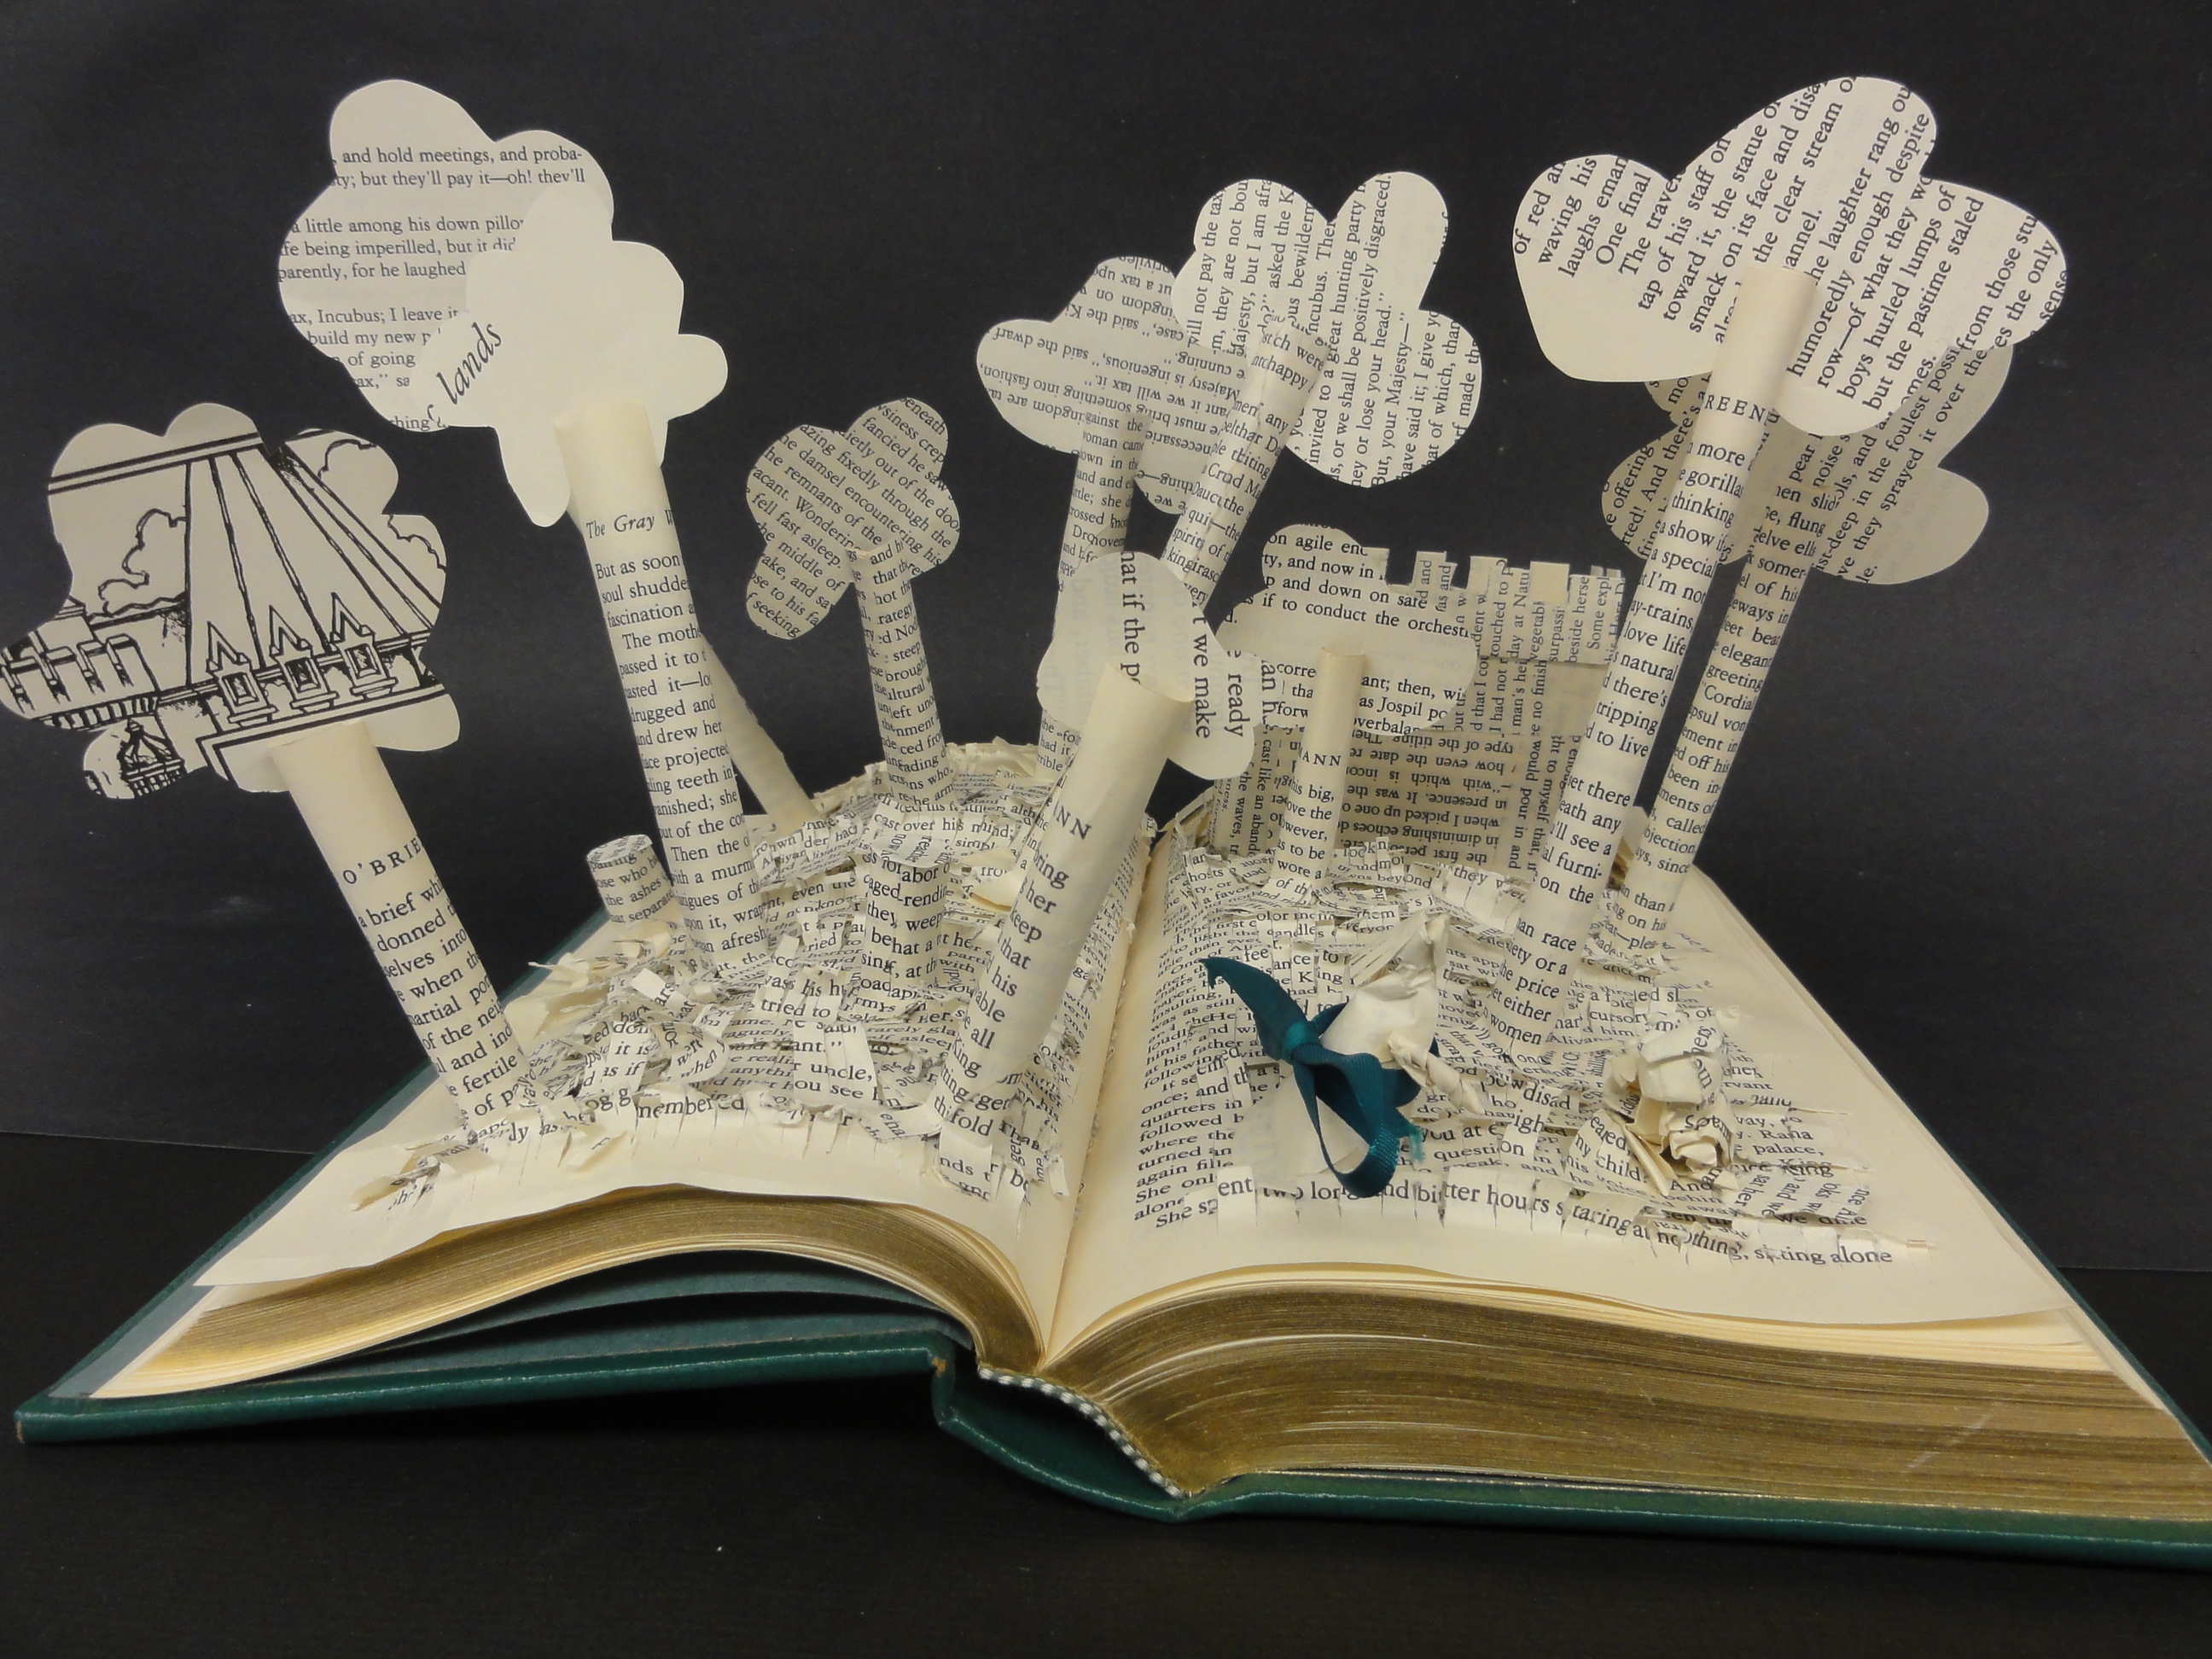 Bayside High students create book sculptures – The Core